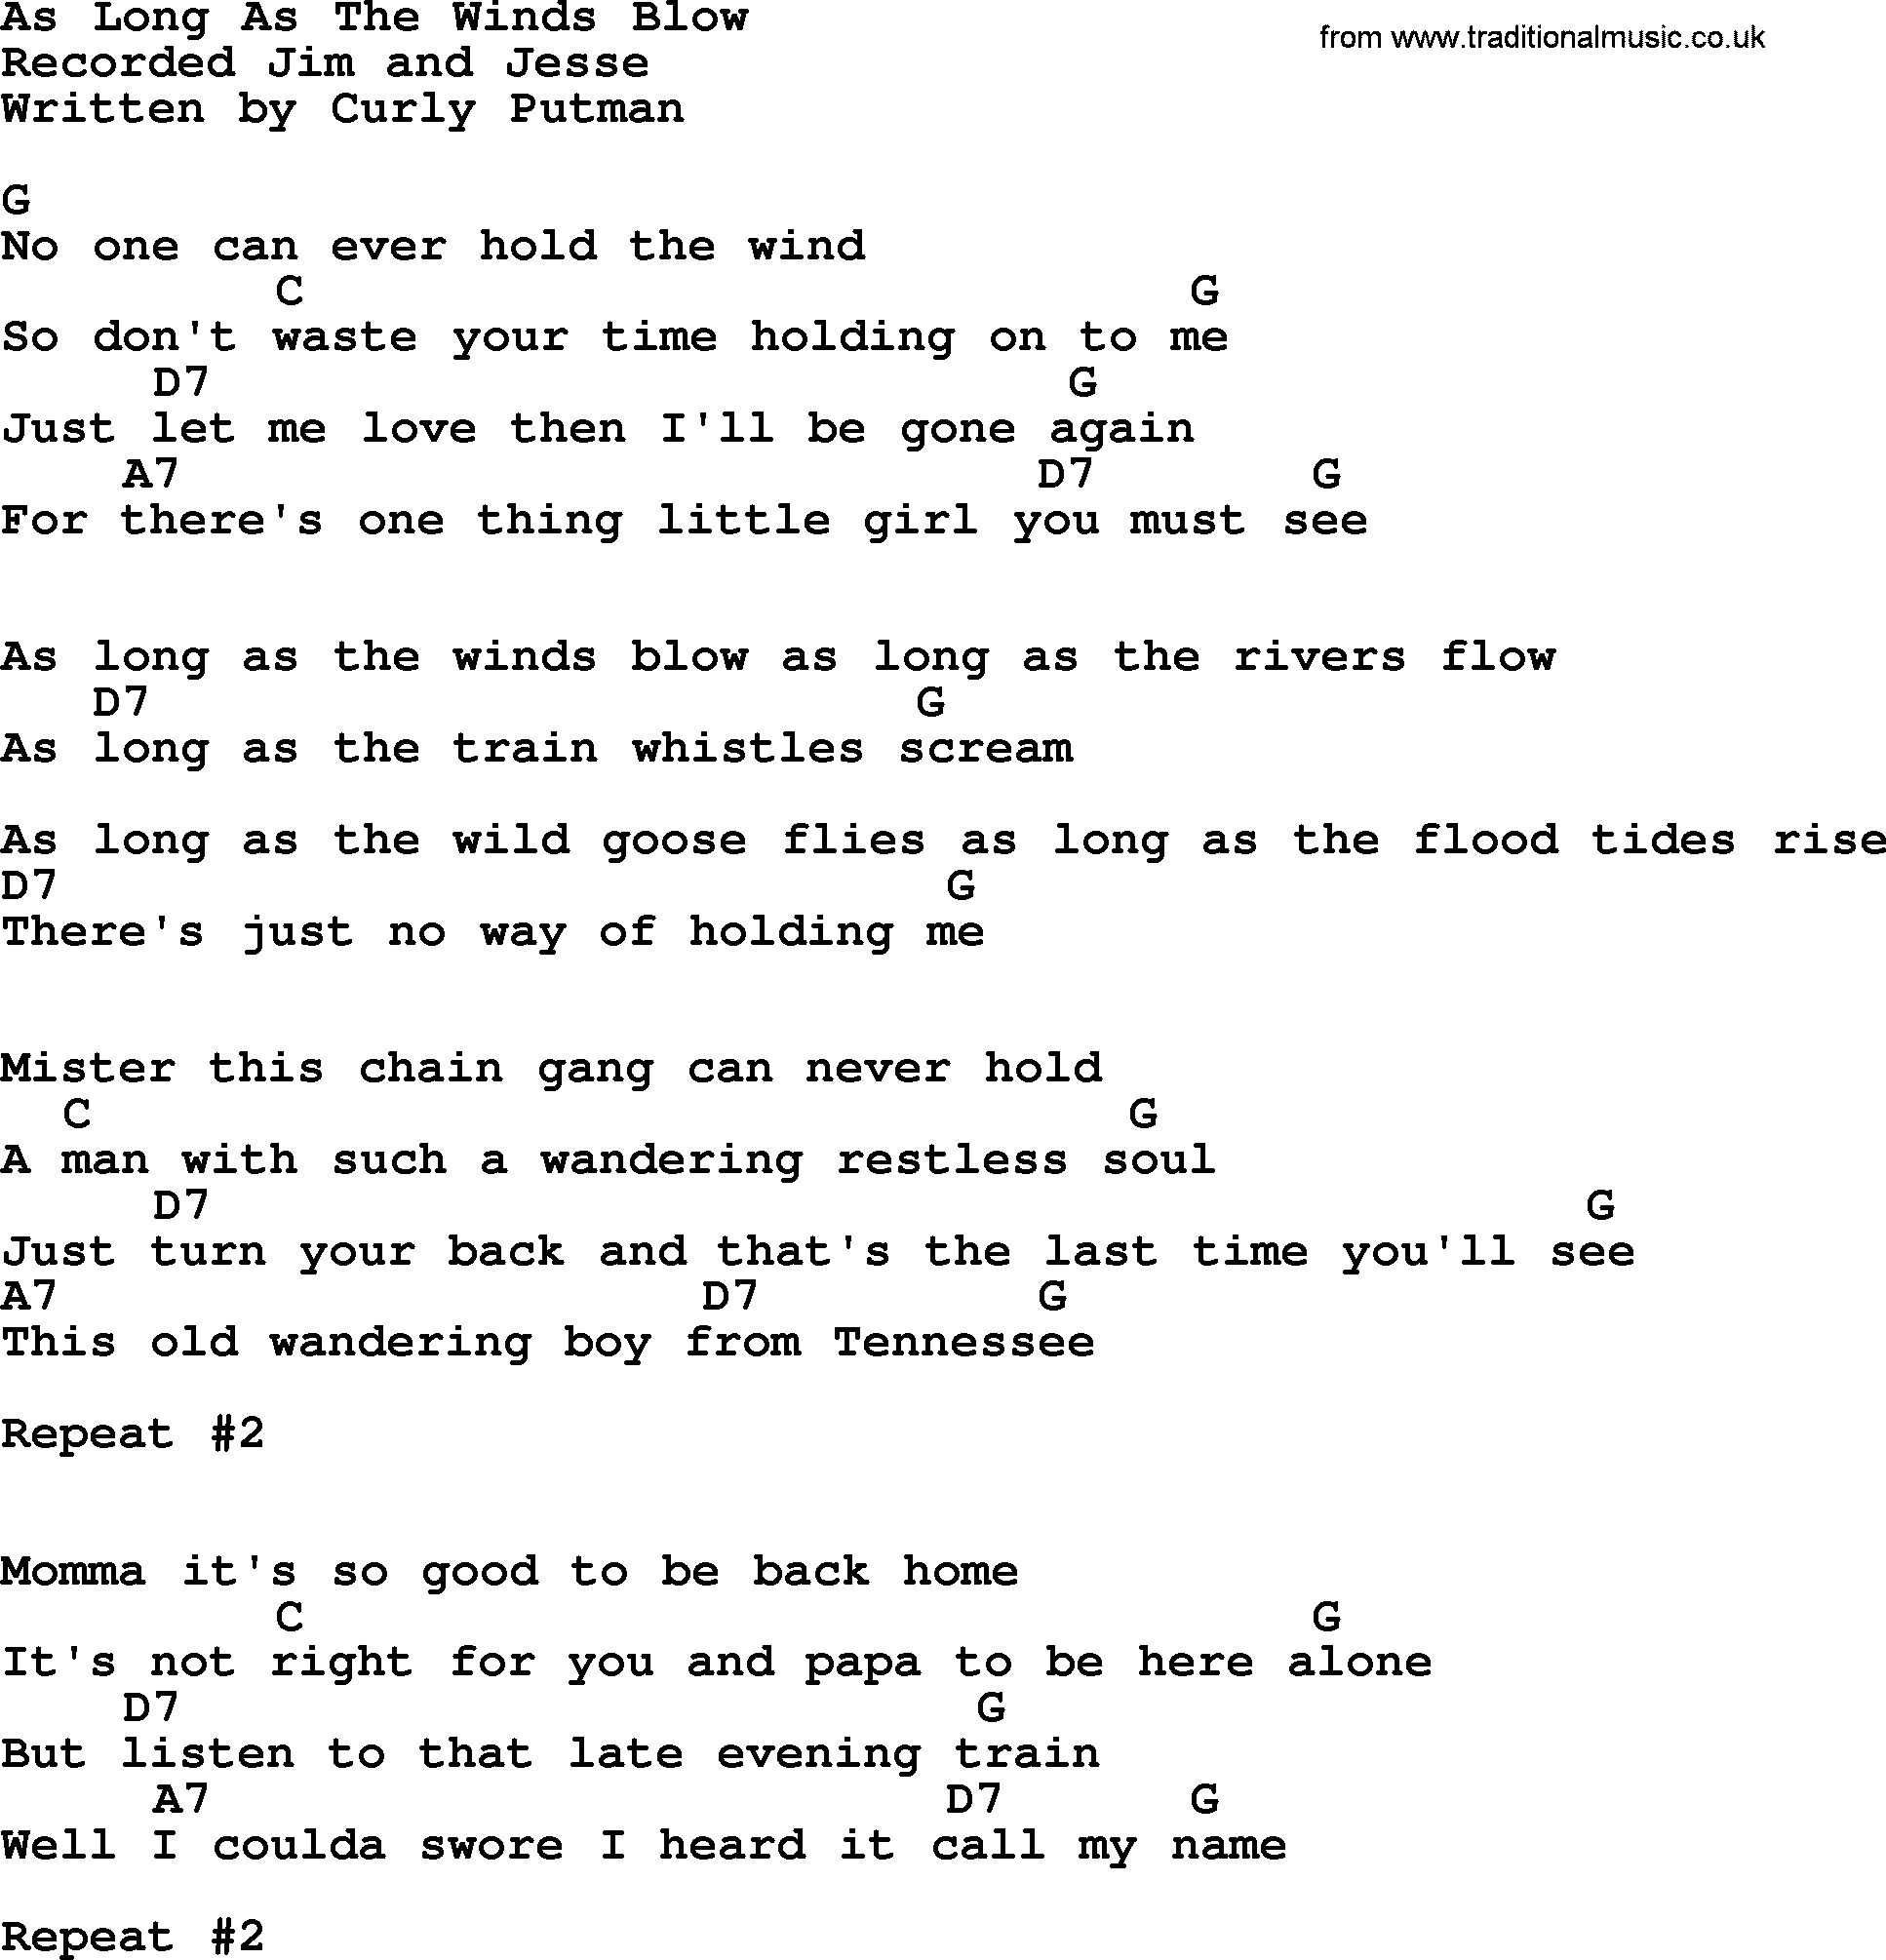 Bluegrass song: As Long As The Winds Blow, lyrics and chords